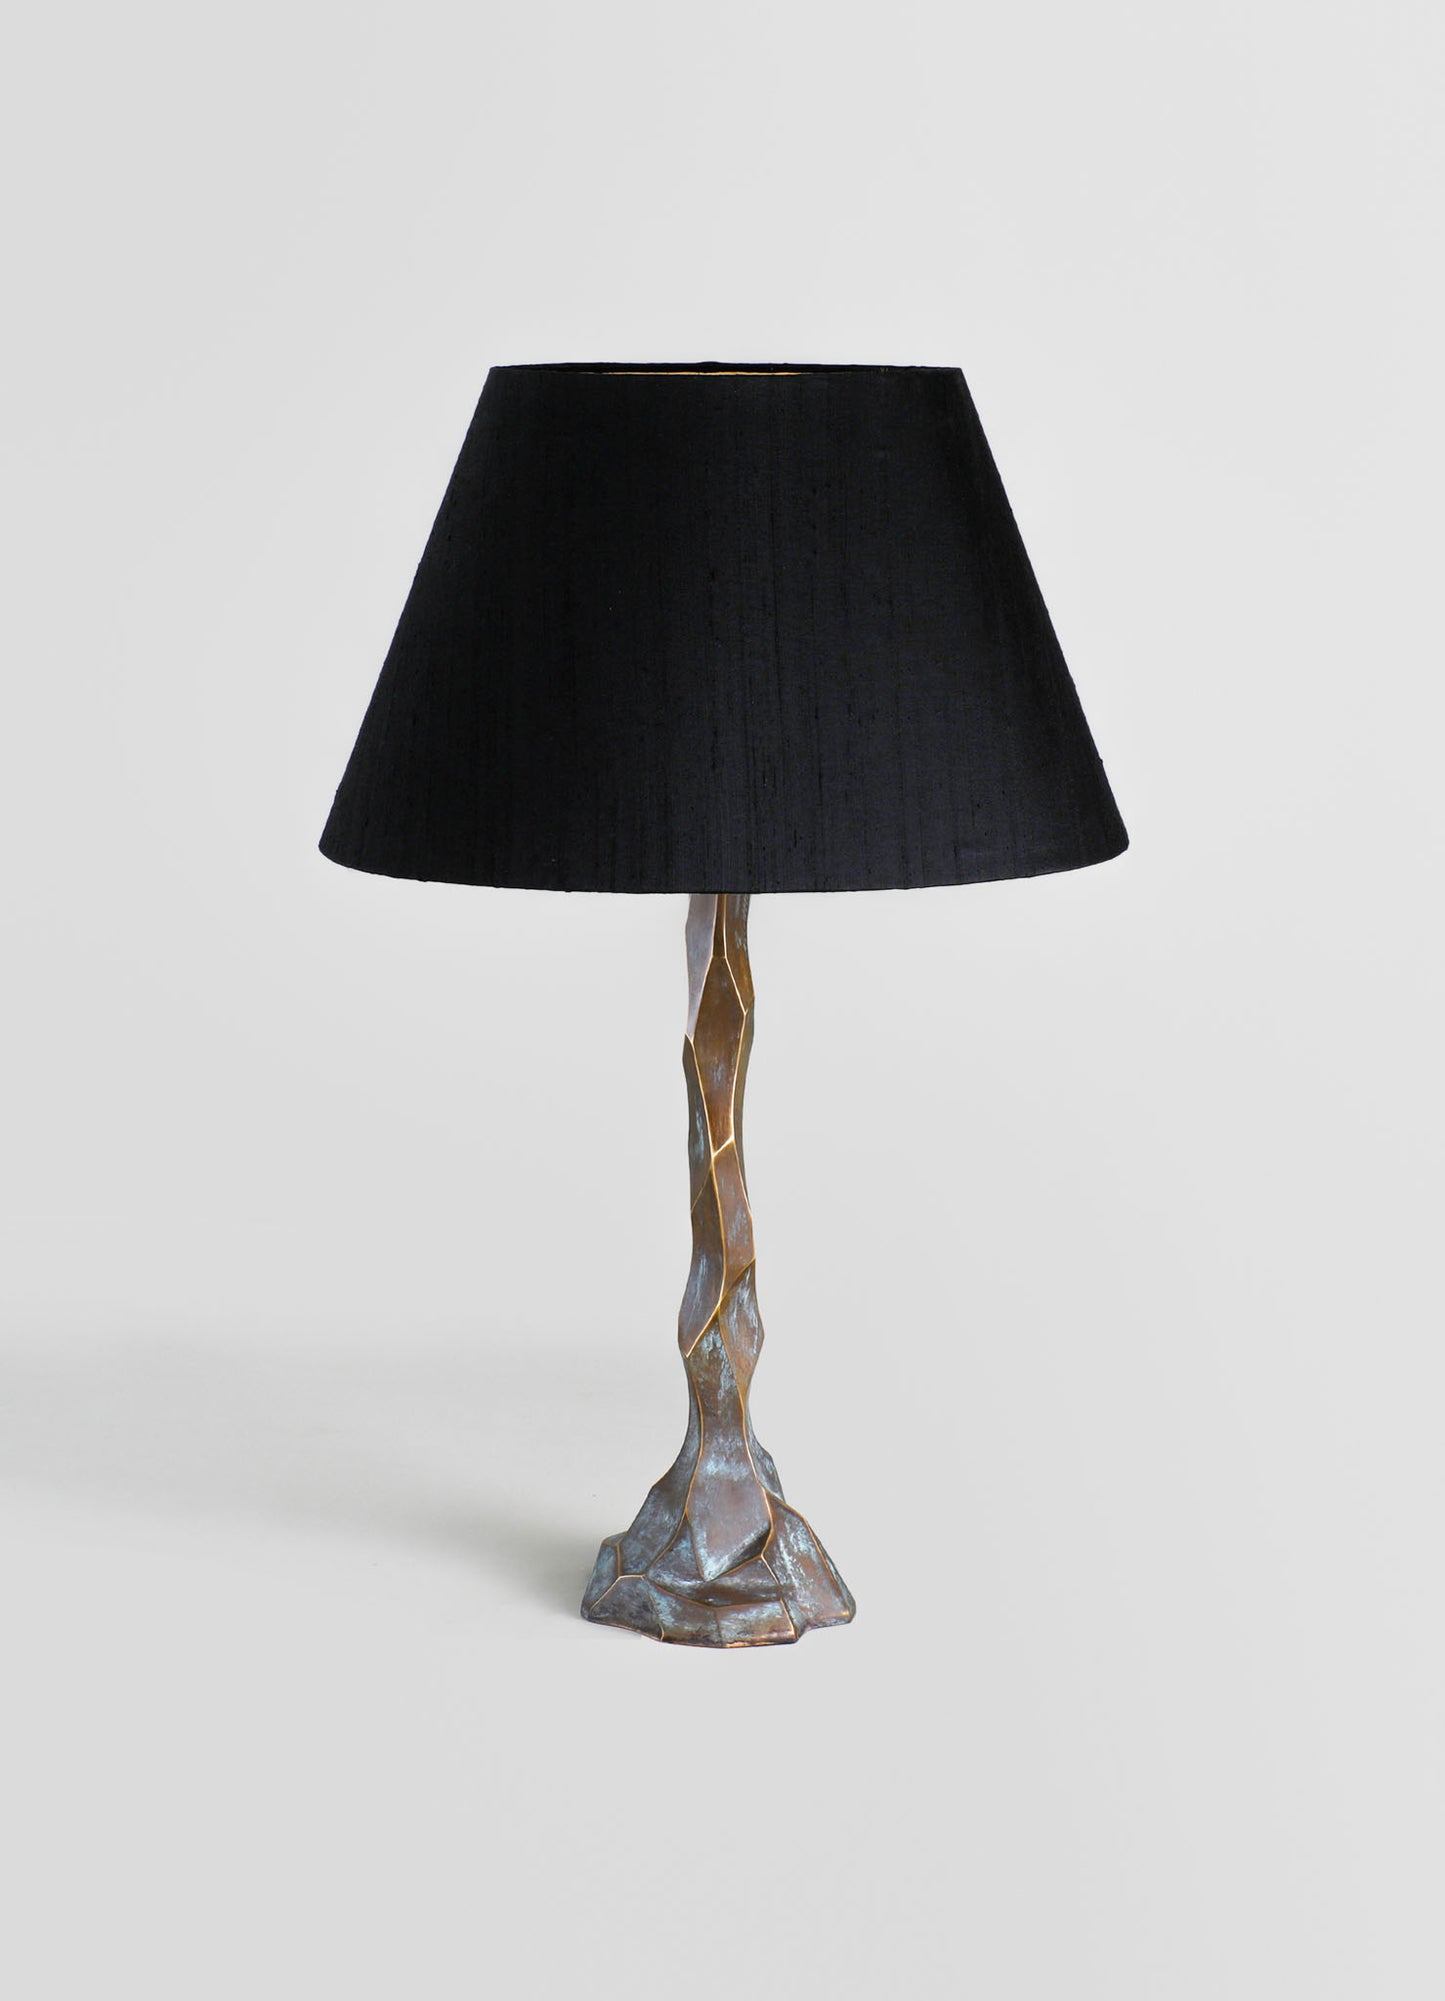 brass table lamp for home decor